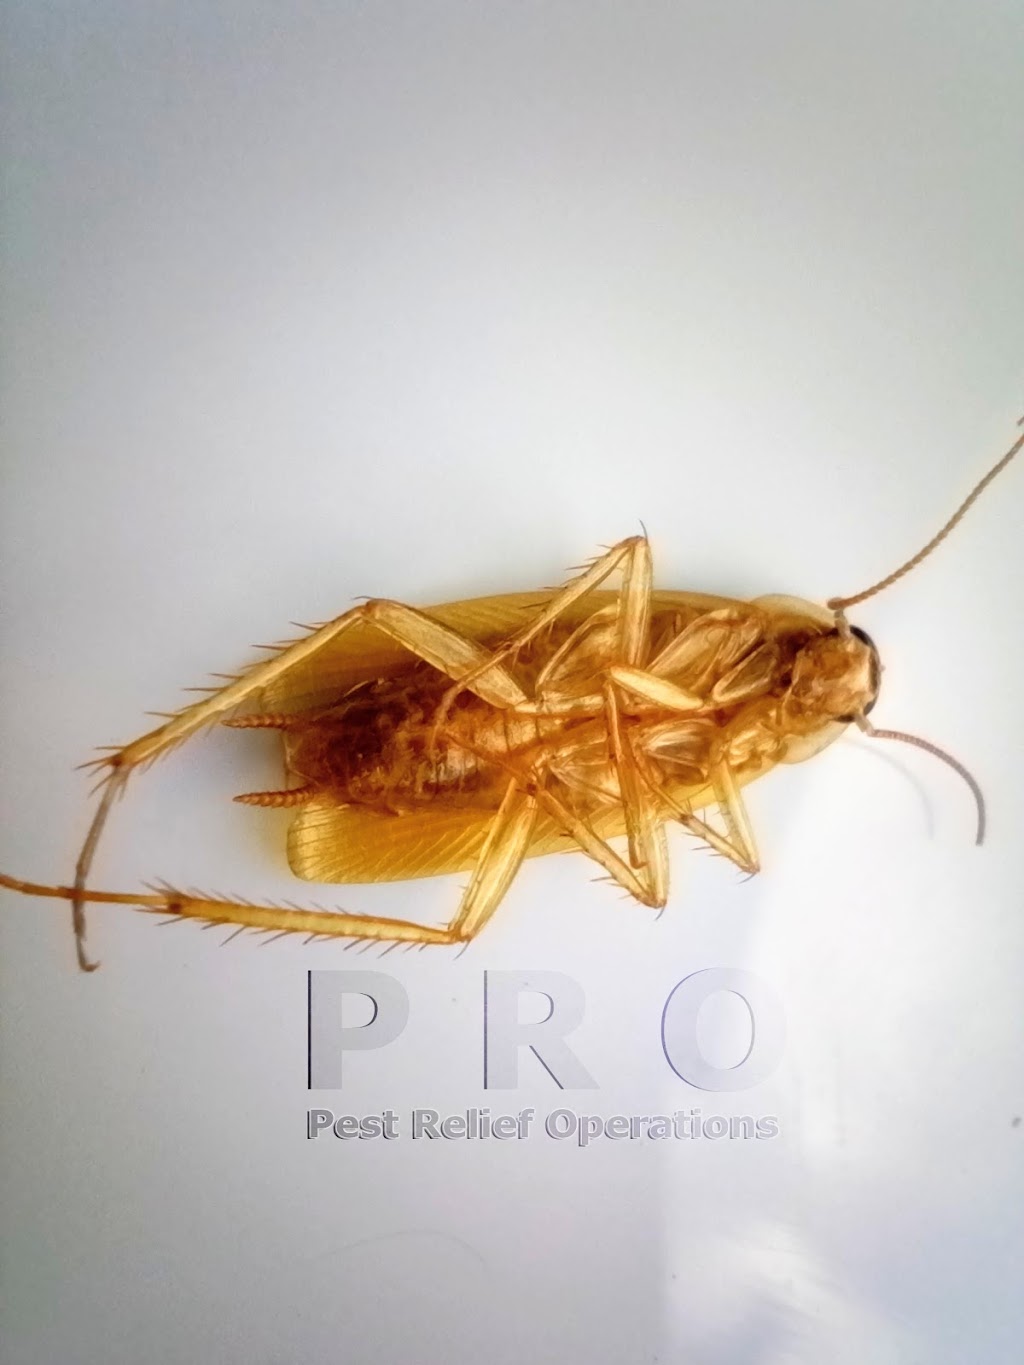 Pest Relief Operations | 267 Niagara St, St. Catharines, ON L2M 5N2, Canada | Phone: (289) 434-6256